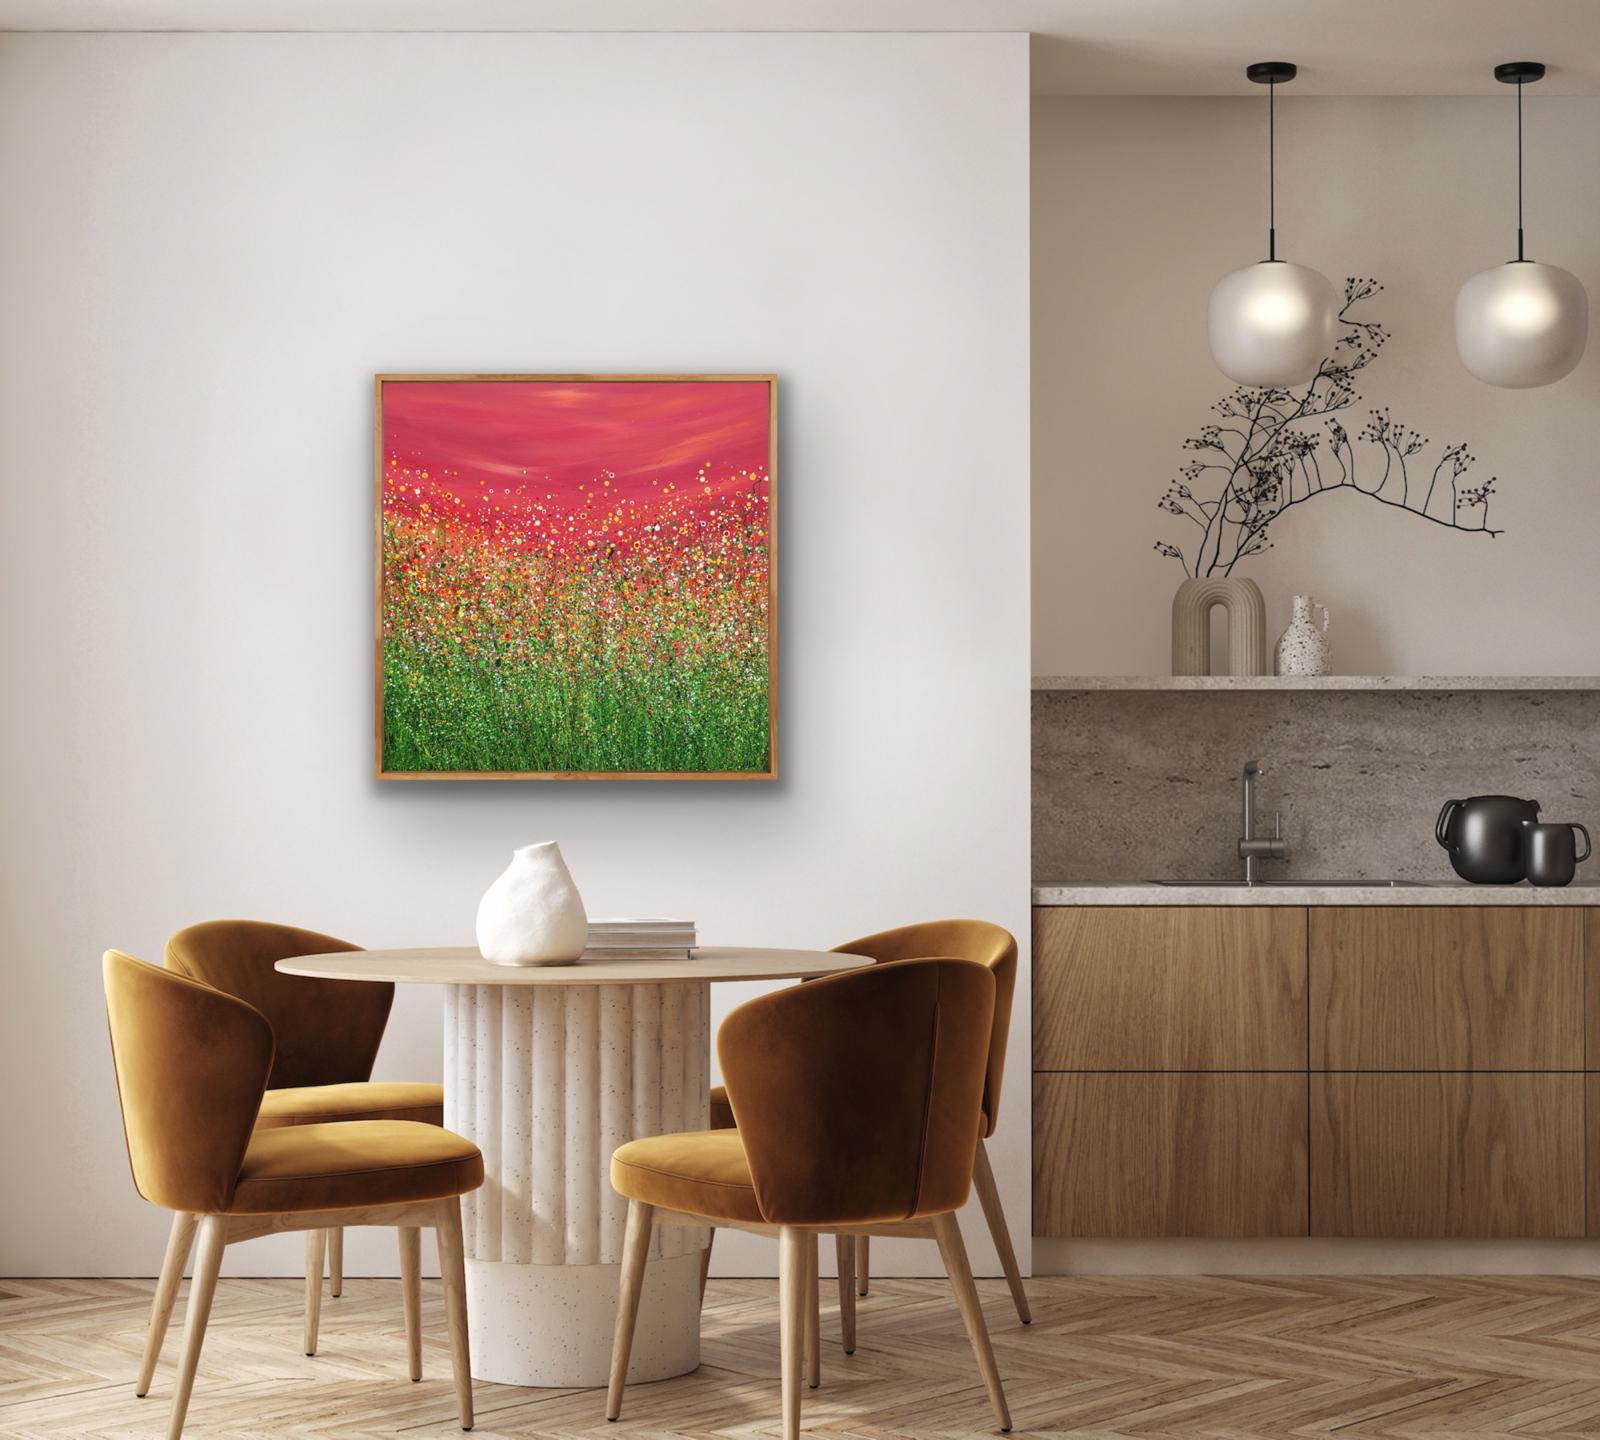 Popping Red Sky Meadows - An Original semi-abstract painting by Lucy Moore. Using her signature string grass technique and a colourful palette Lucy has created a semi-abstract twist to her classic meadow paintings, This piece would brighten any home